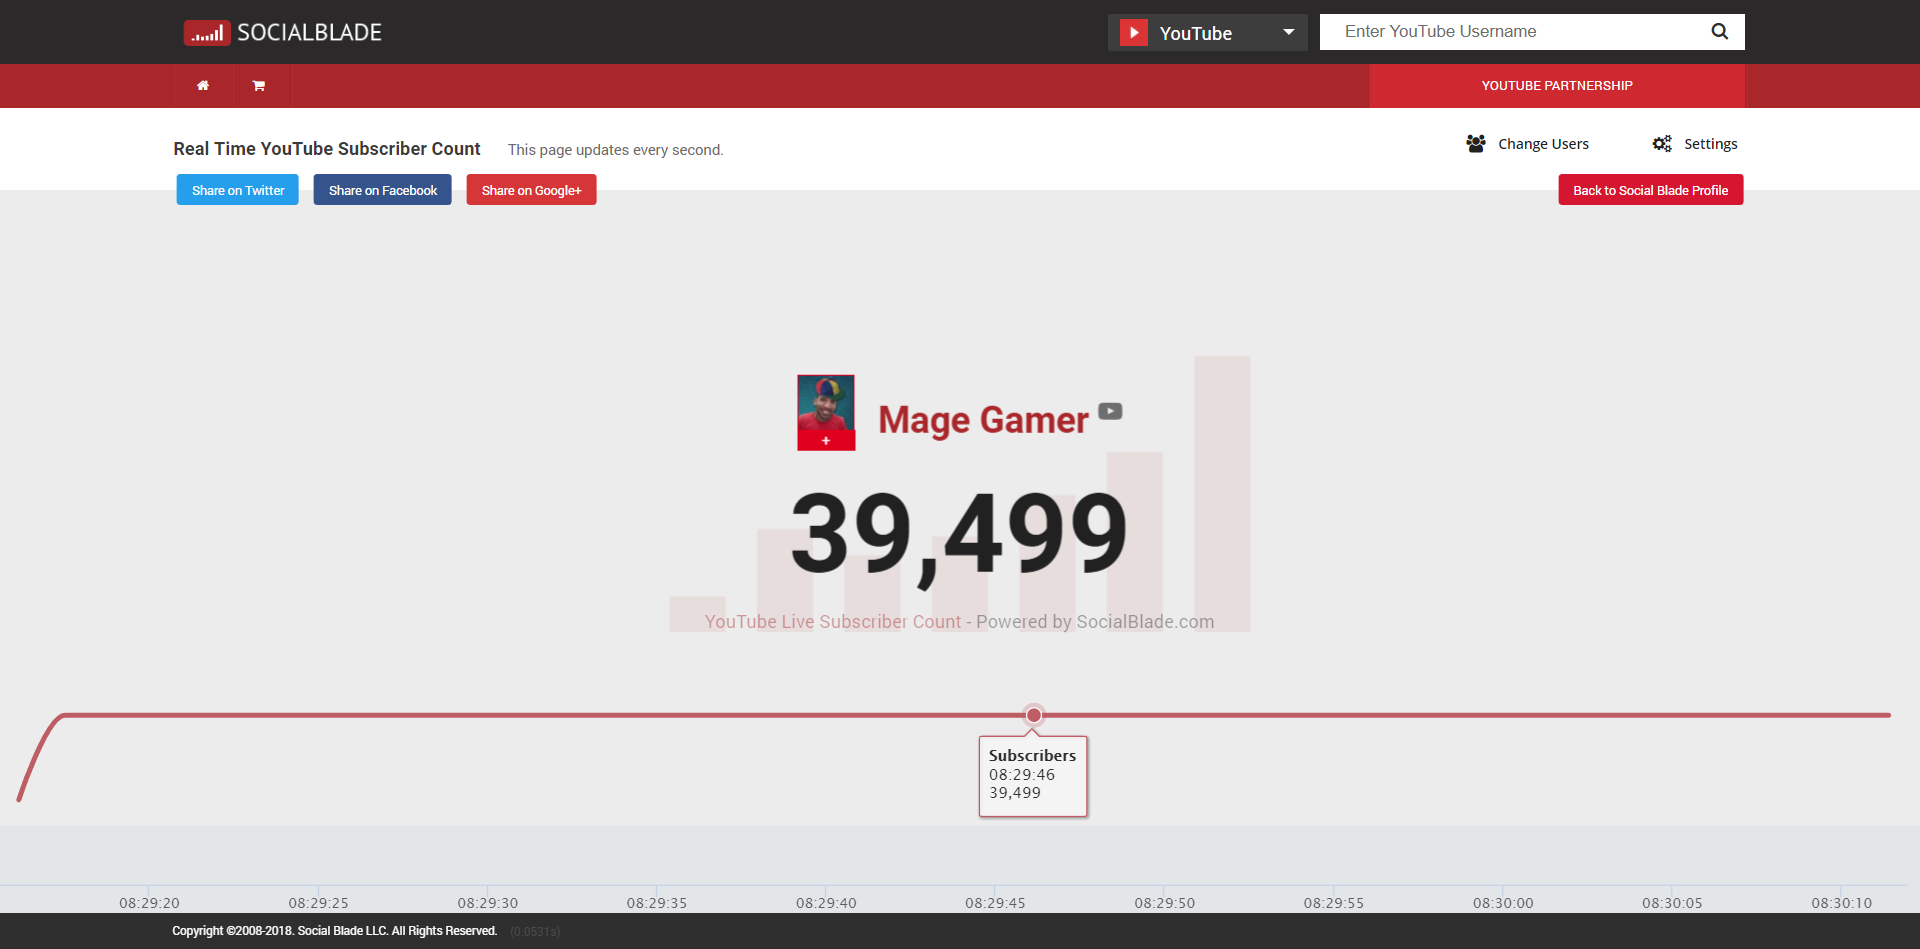 Livecounts - Live Subscriber Count, Apps